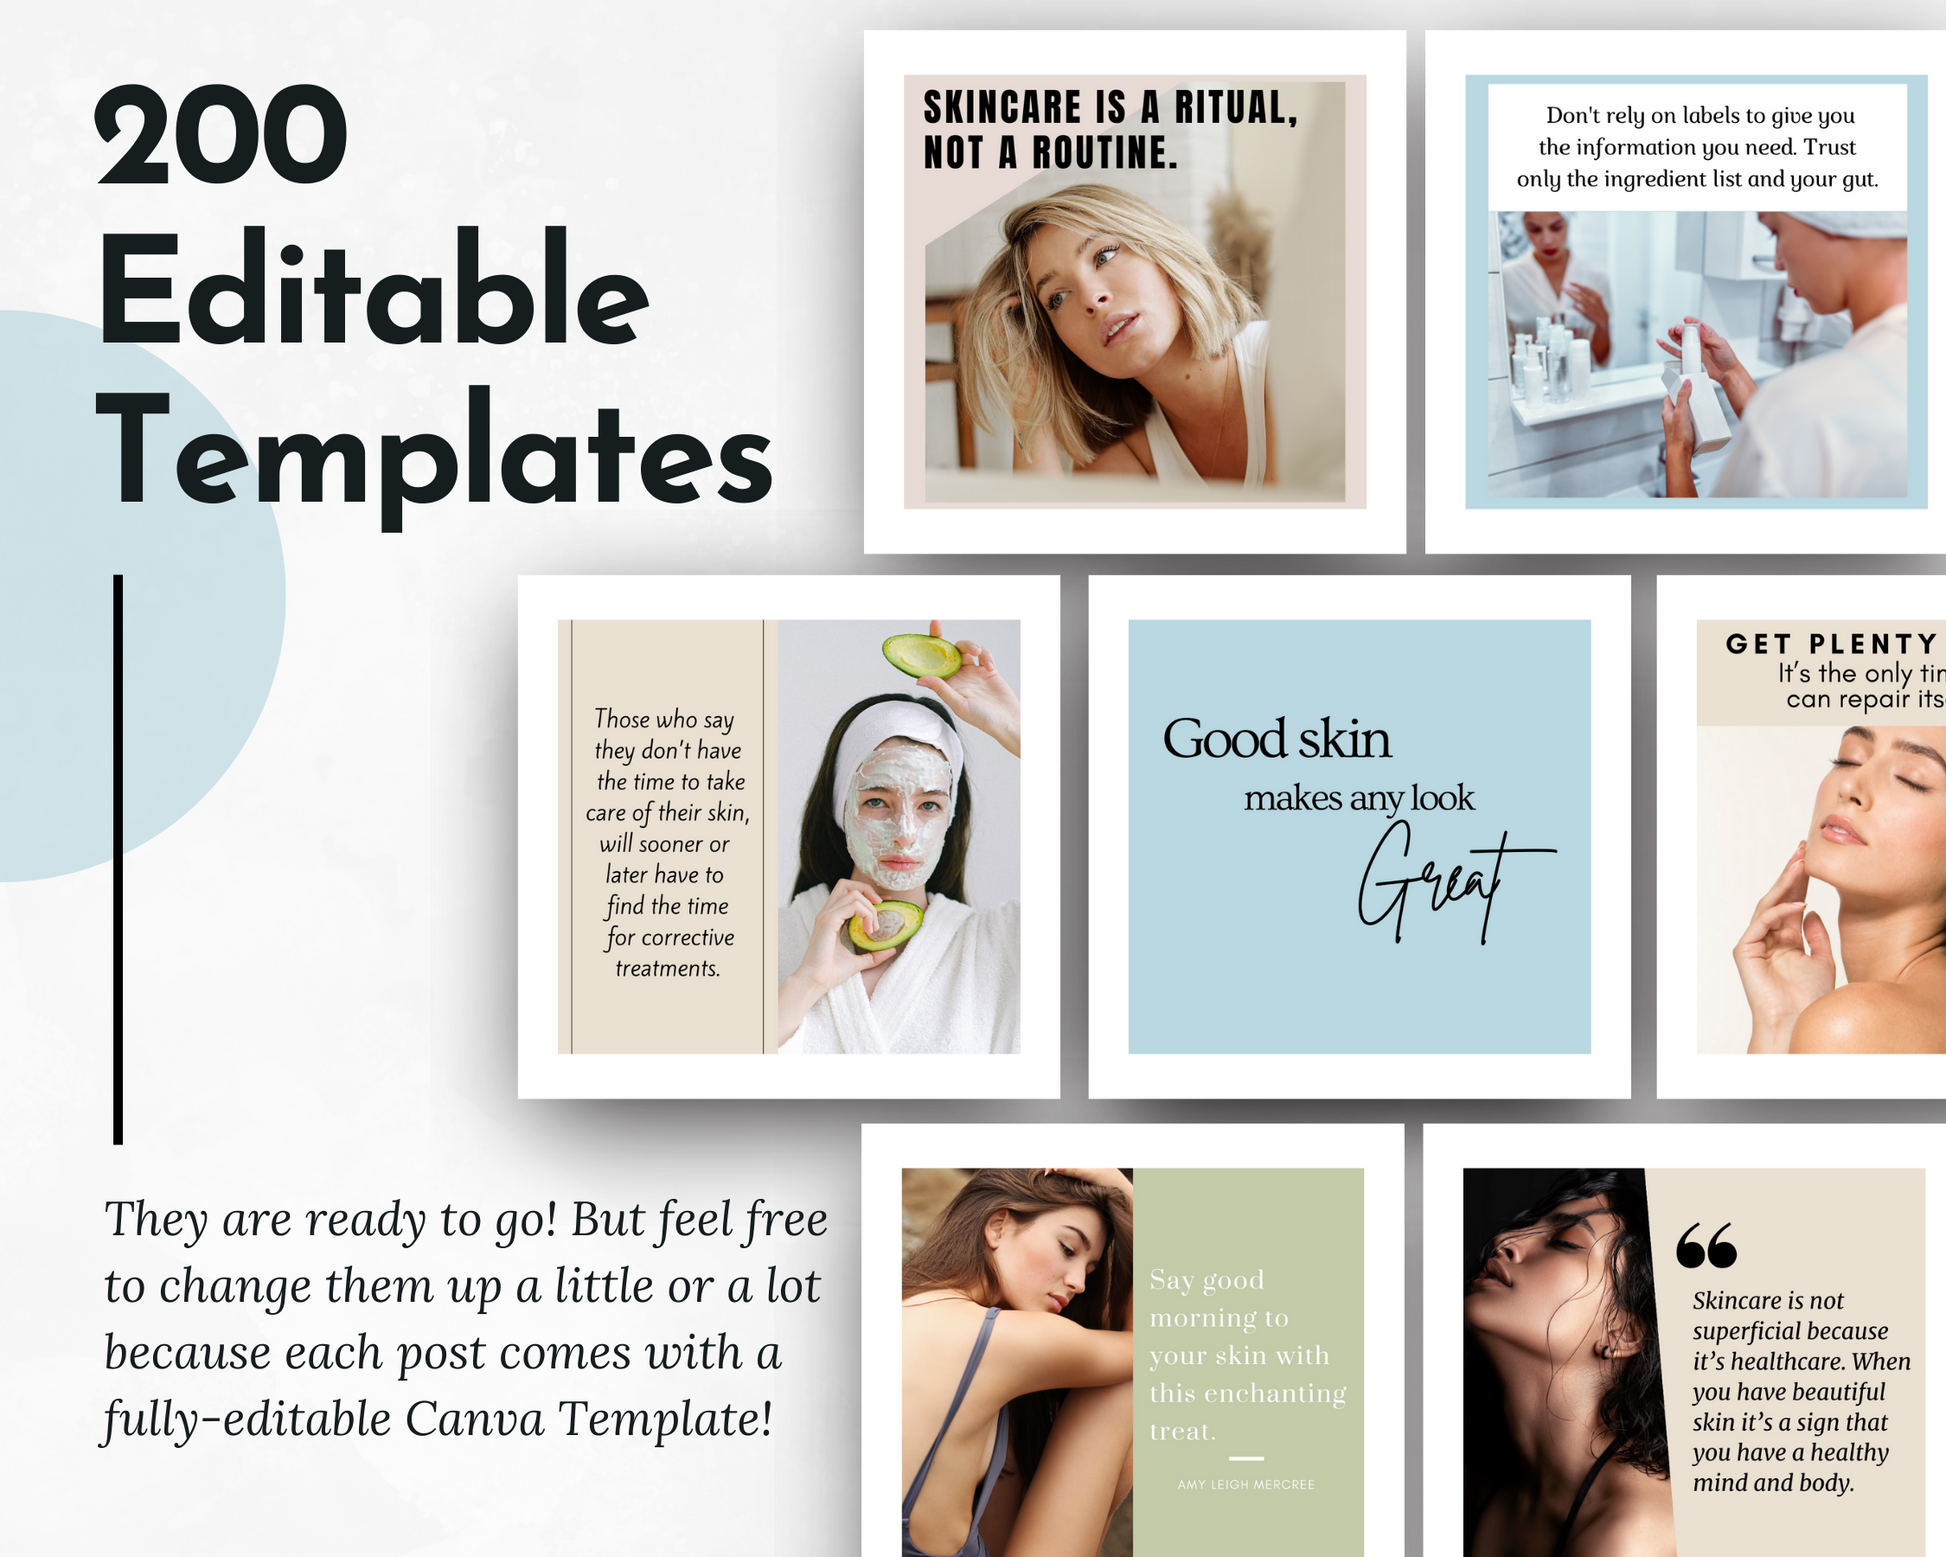 200 editable skincare social media post templates from Socially Inclined.